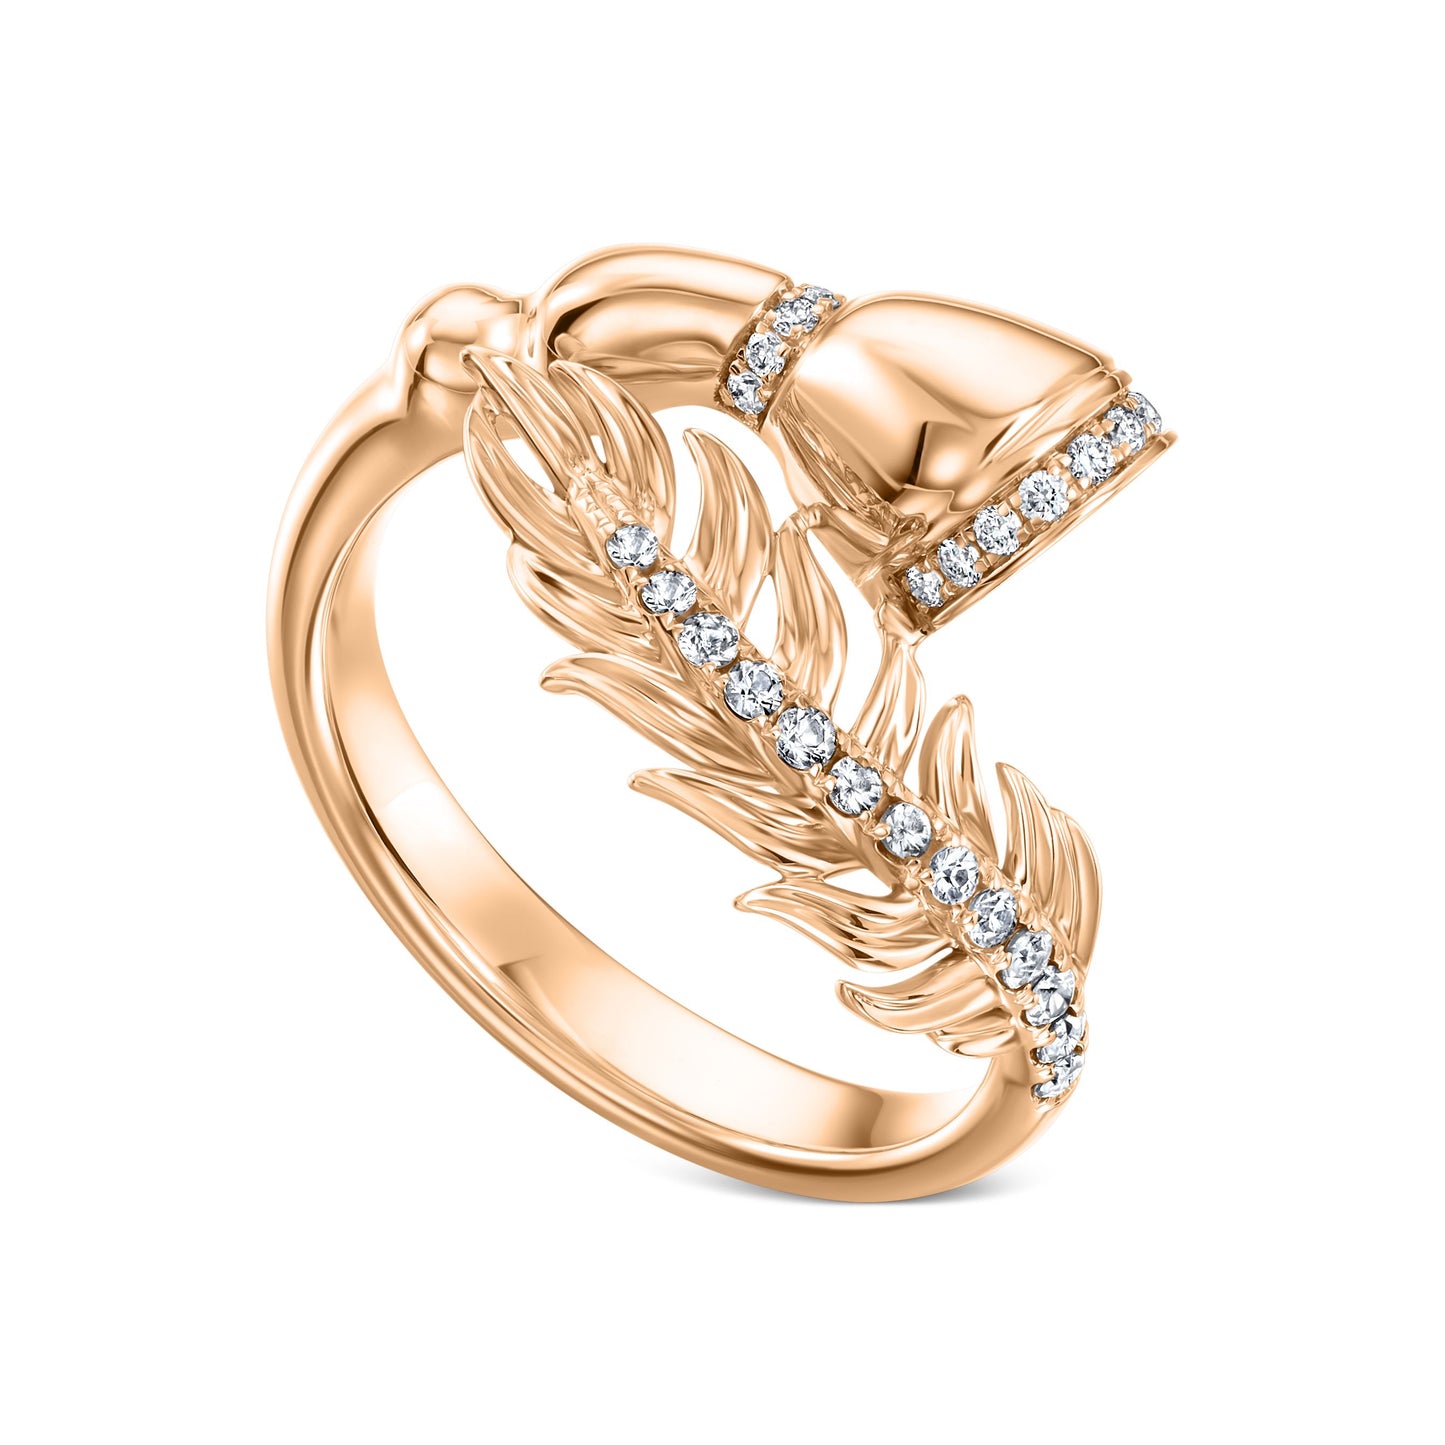 Fearless Feathers Rose Gold and Diamonds Ring